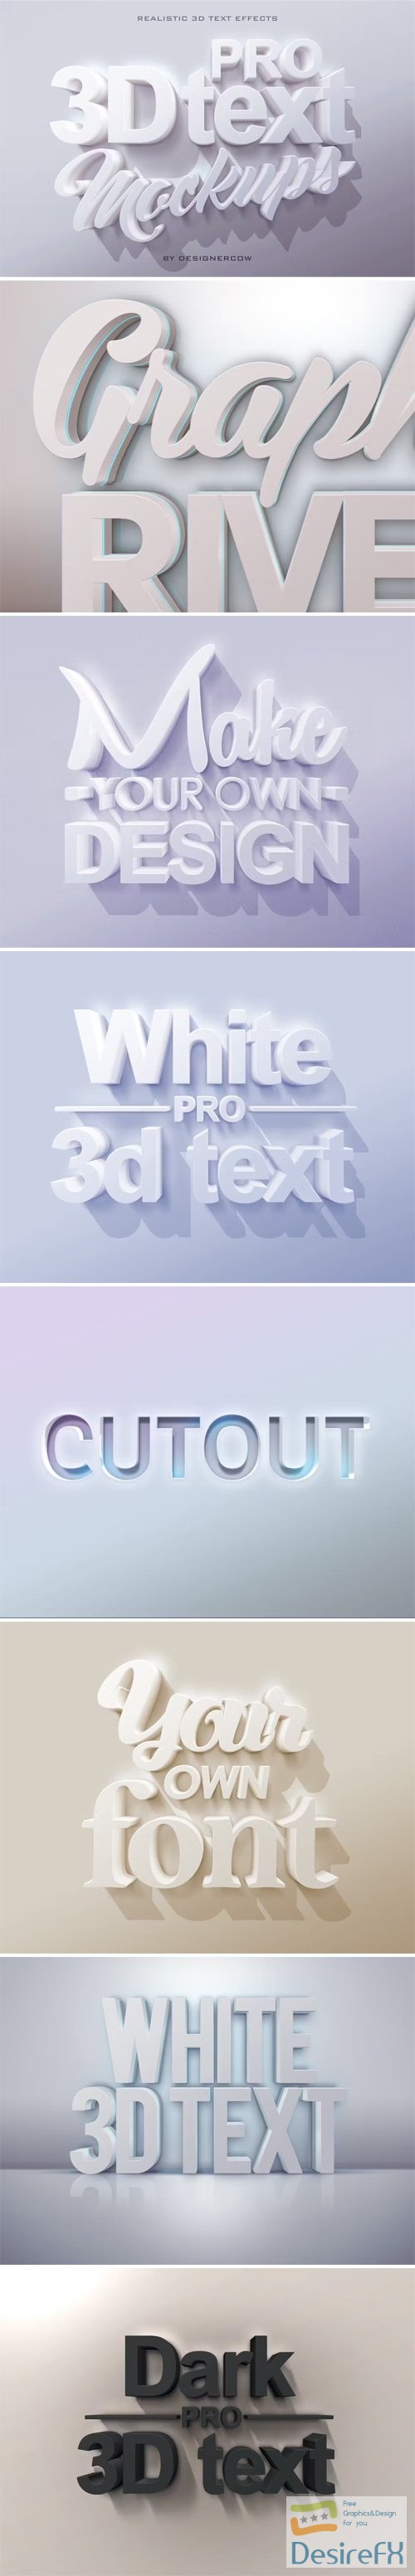 Pro 3D Text Mockups for Photoshop